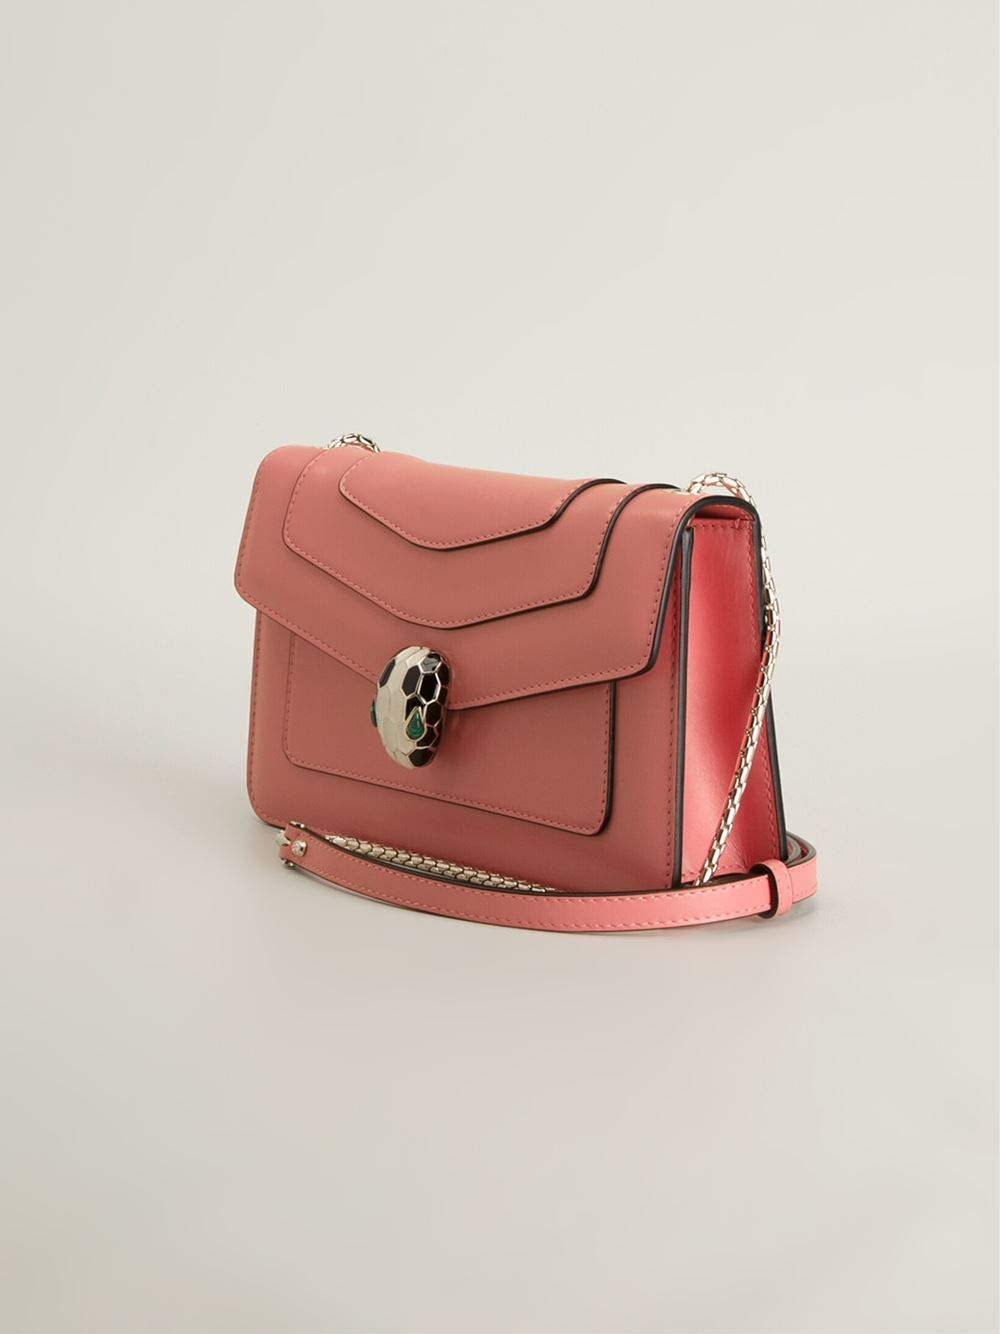 BVLGARI Serpenti Forever Leather Cross-Body Bag in Pink - Lyst